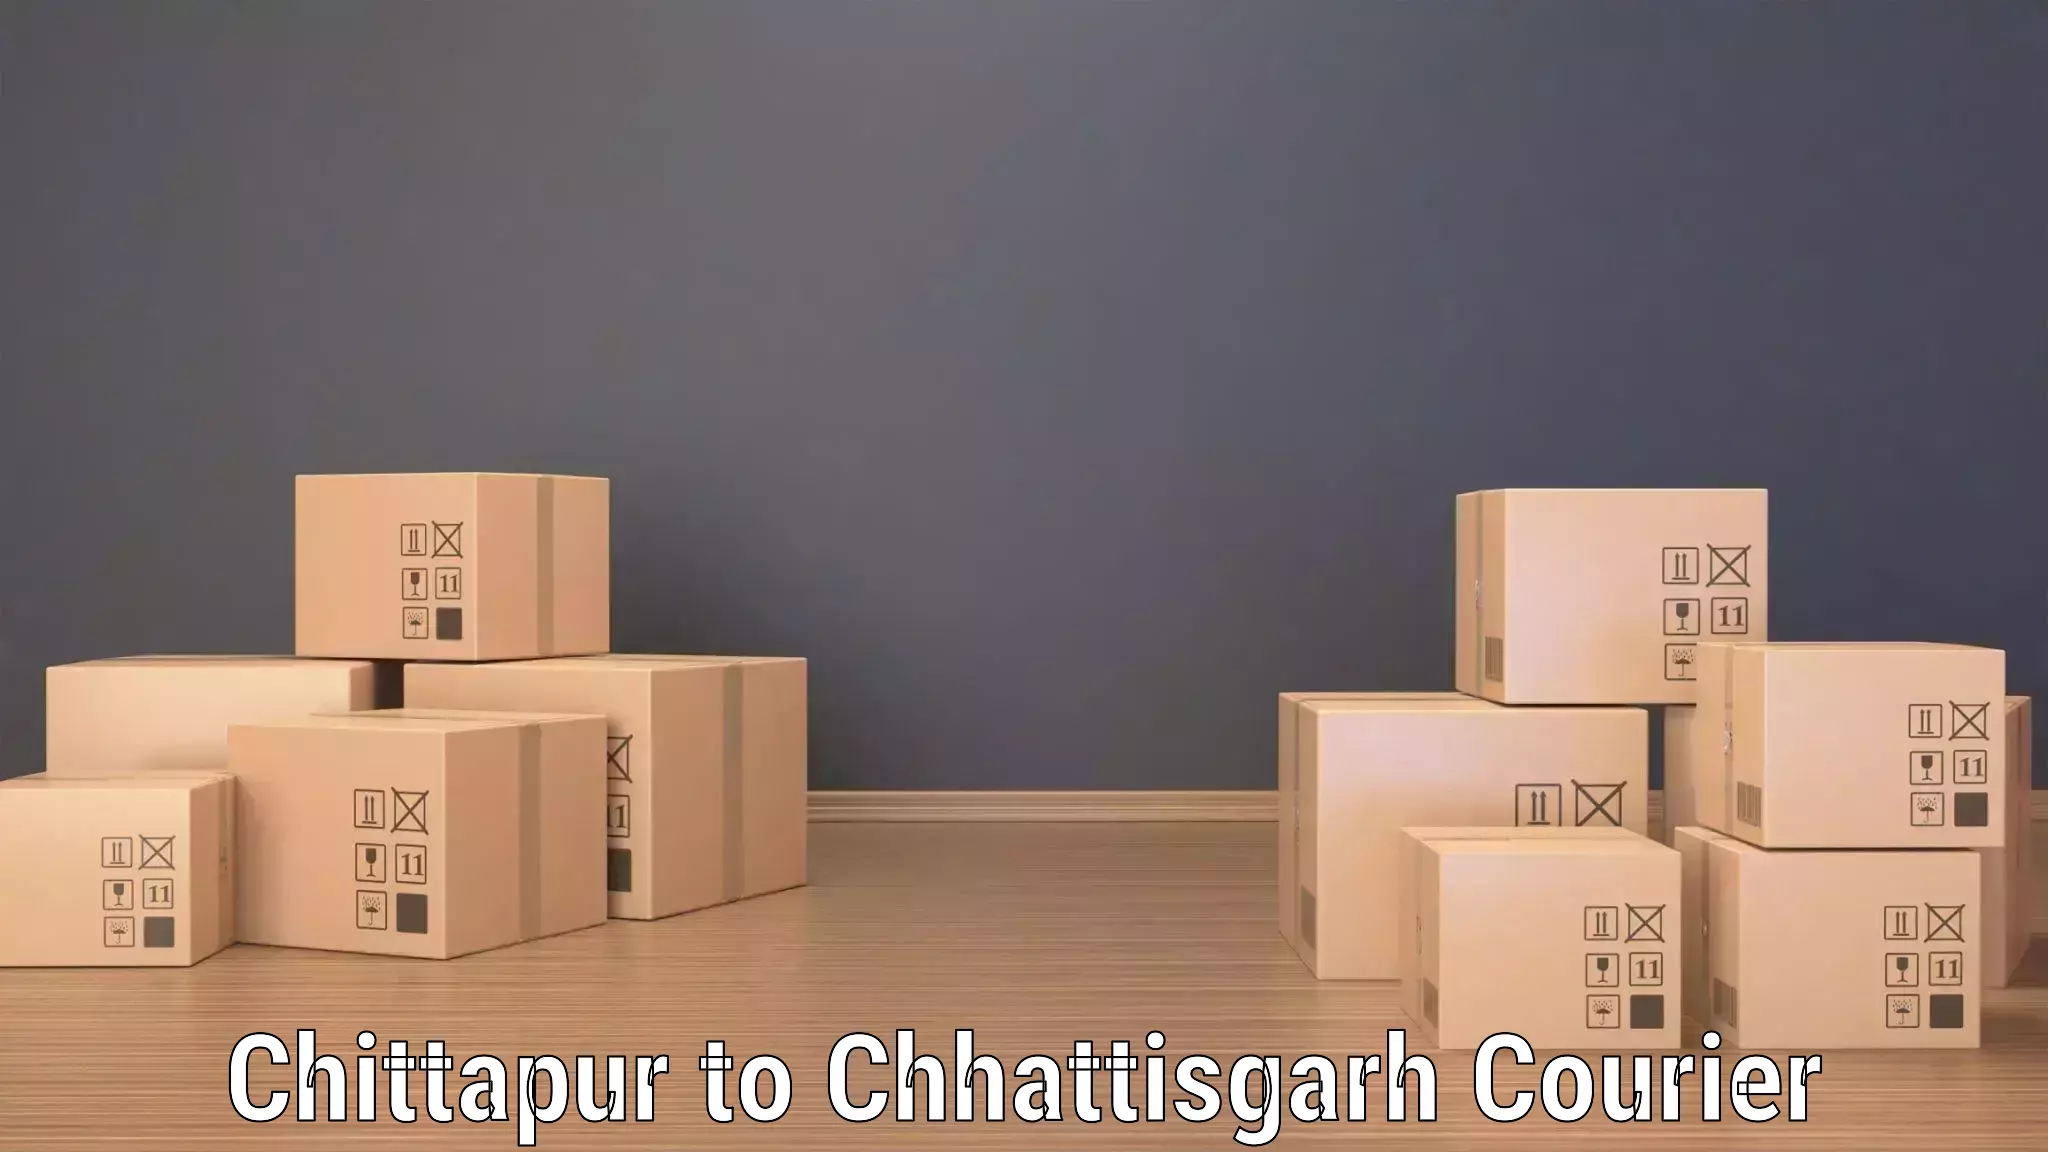 State-of-the-art courier technology Chittapur to Pratappur